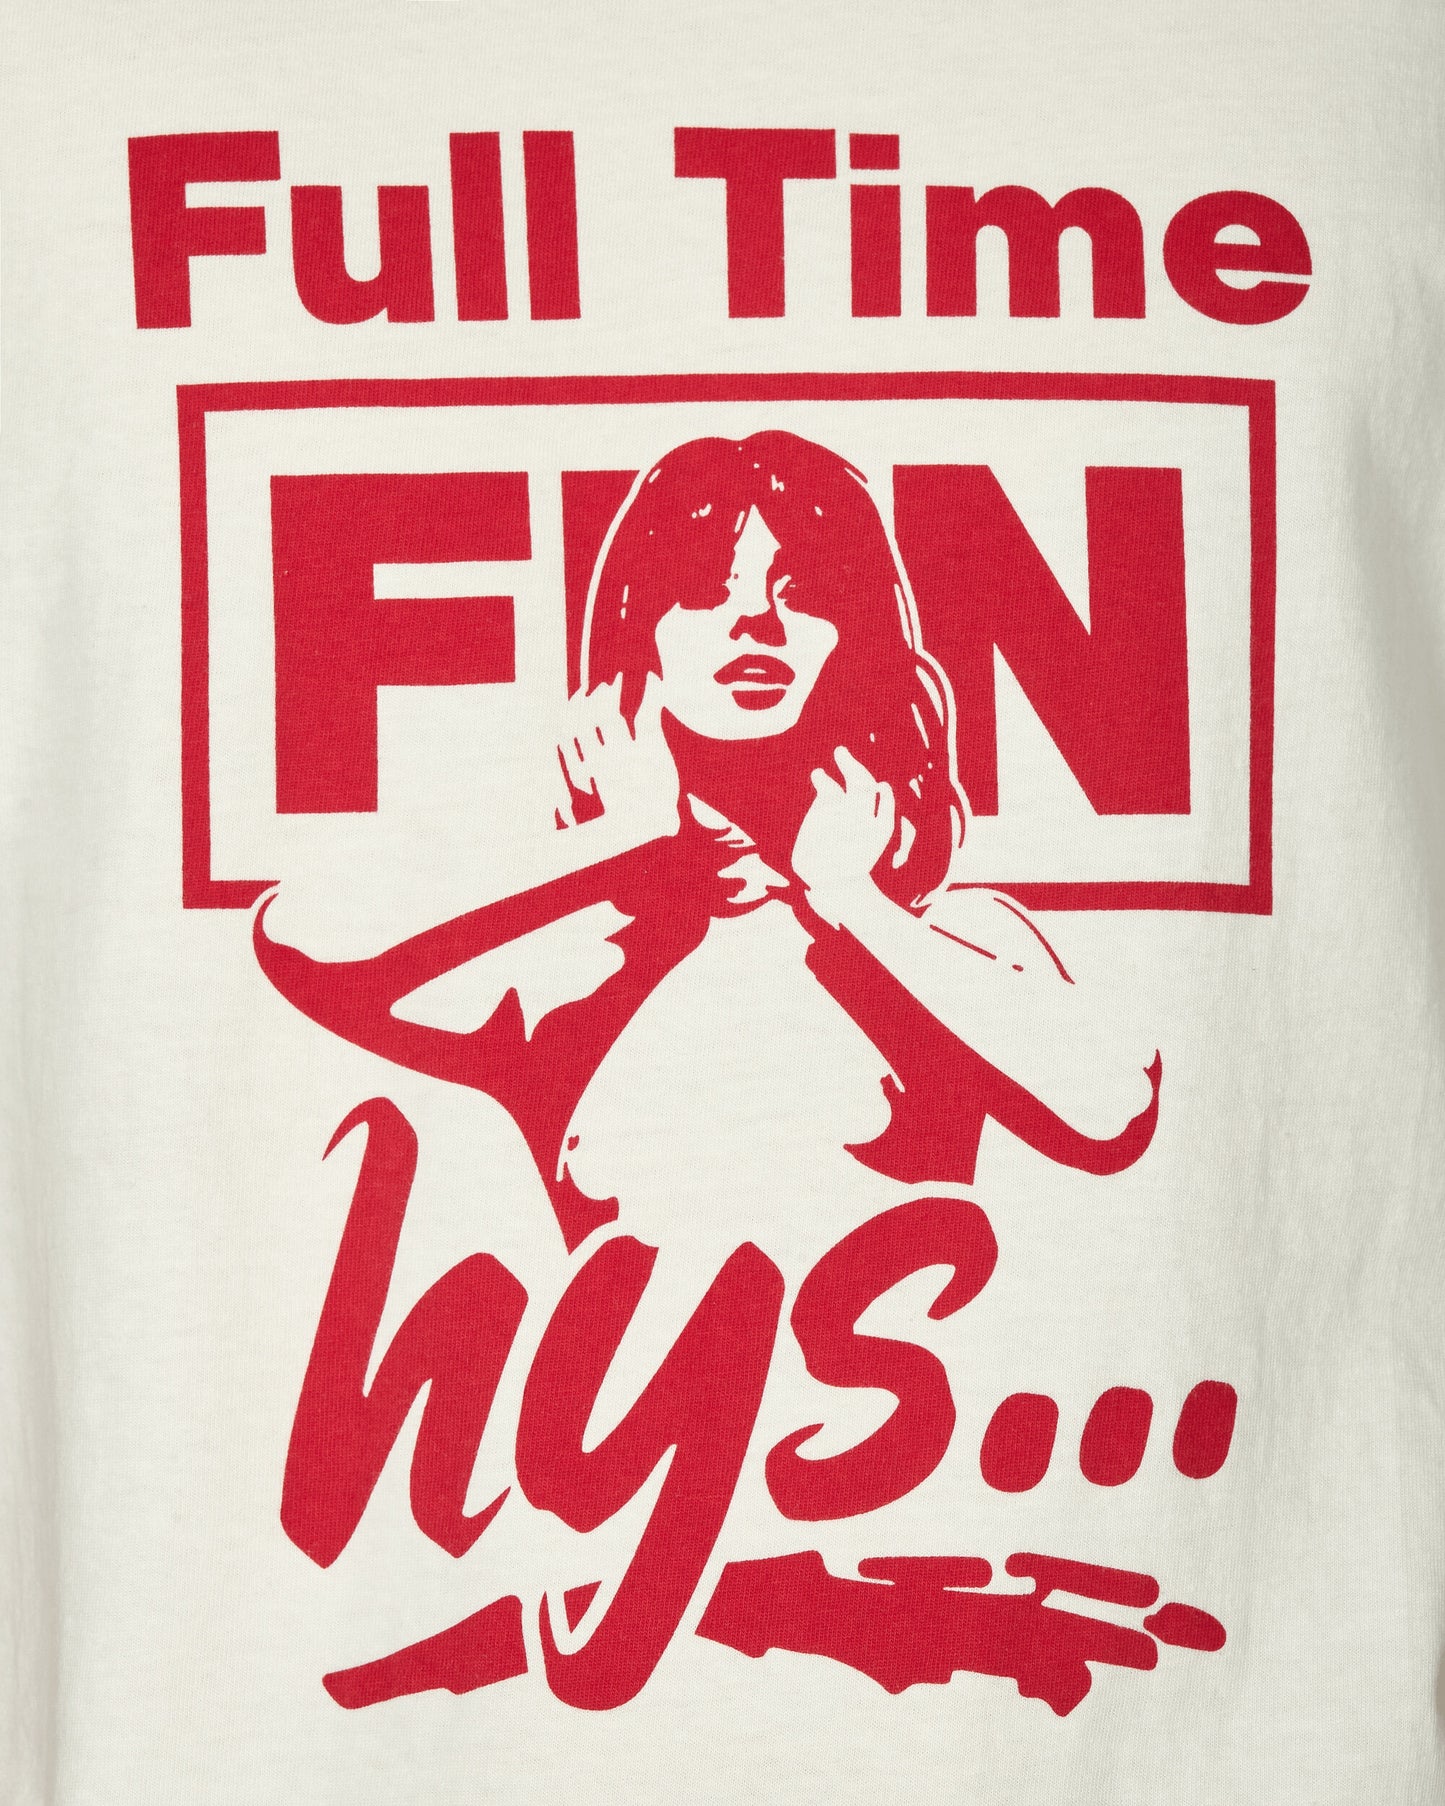 Hysteric Glamour Full Time Fun Dirty White T-Shirts Shortsleeve 02241CT07 A